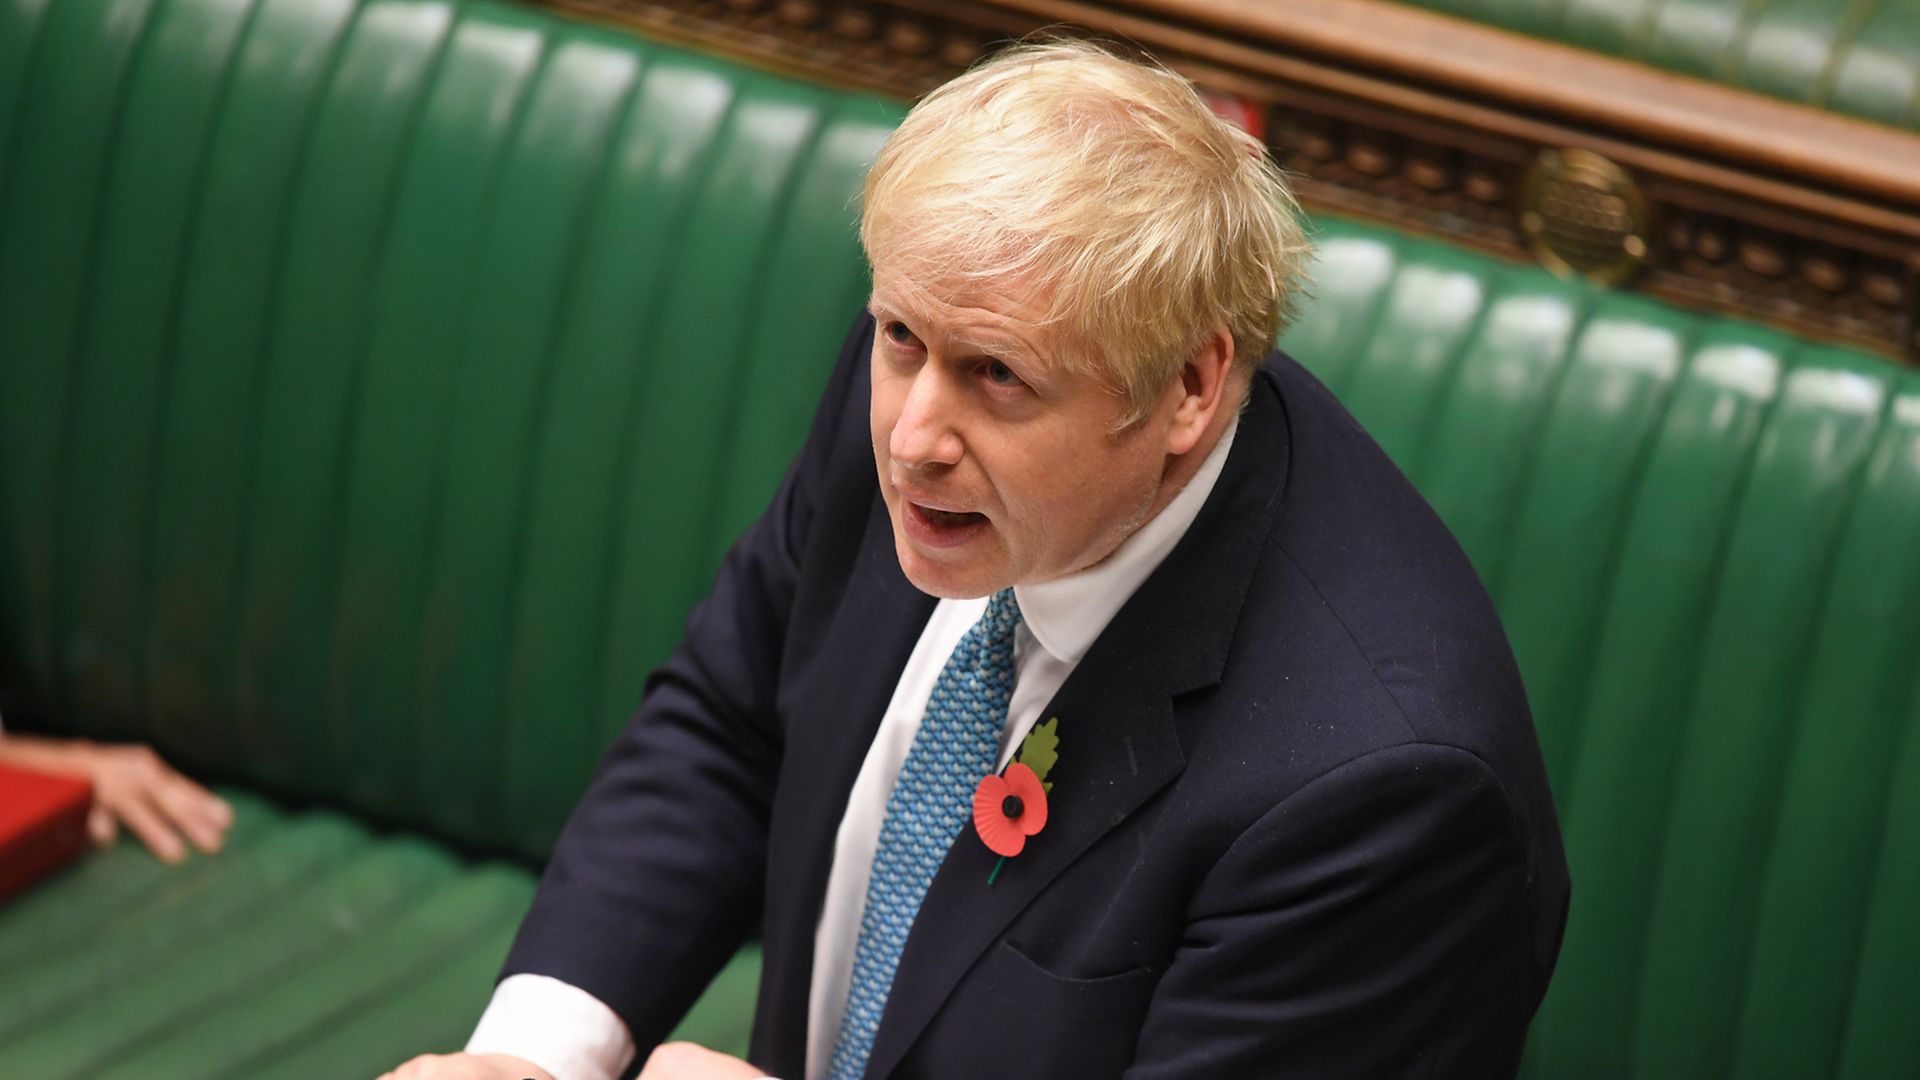 Prime Minister Boris Johnson appearing before the House of Commons to make a statement - Credit: PA